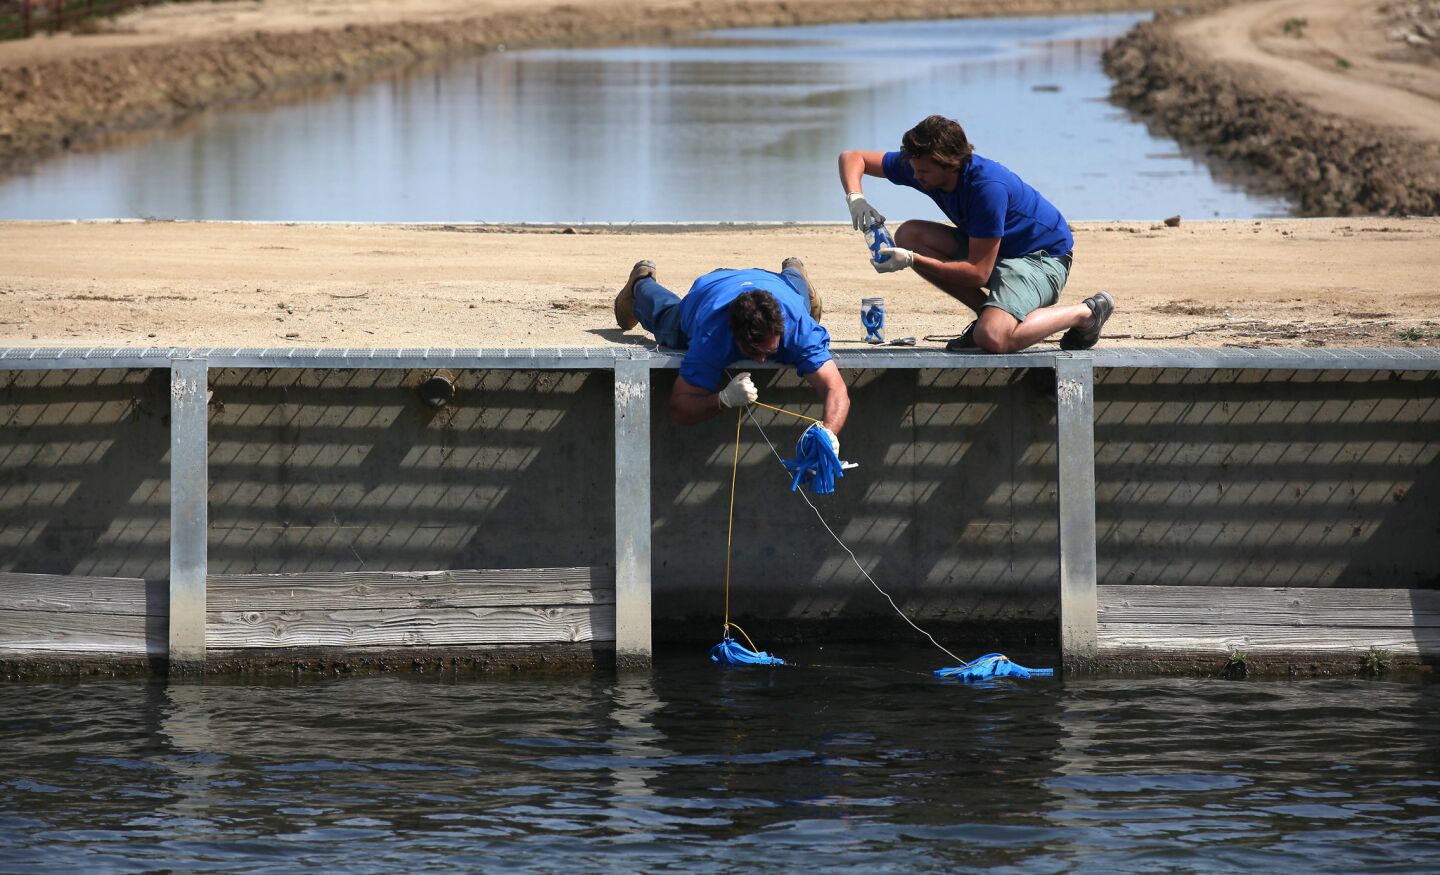 Scott Smith, chief scientist at Water Defense, left, and assistant Skye Wallin retrieve foam sponges which were deployed to absorb test water from a canal in the Cawelo Water District near Bakersfield.